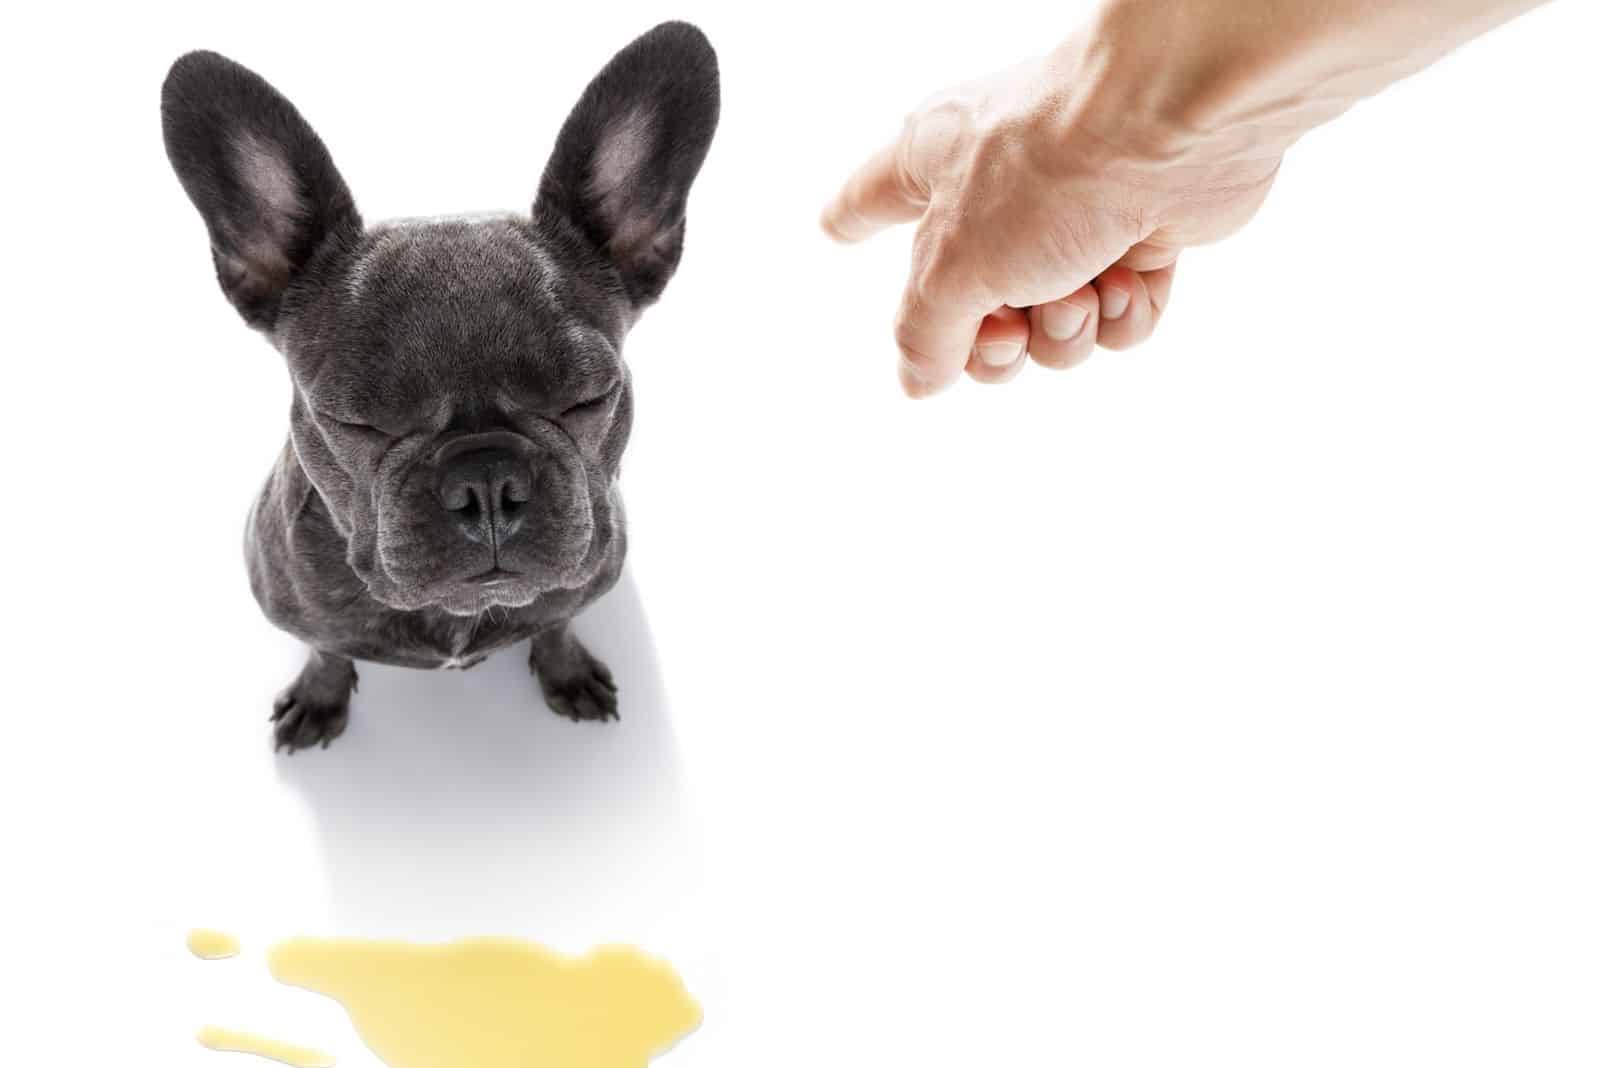 french bulldog dog being punished for urinating on the floor